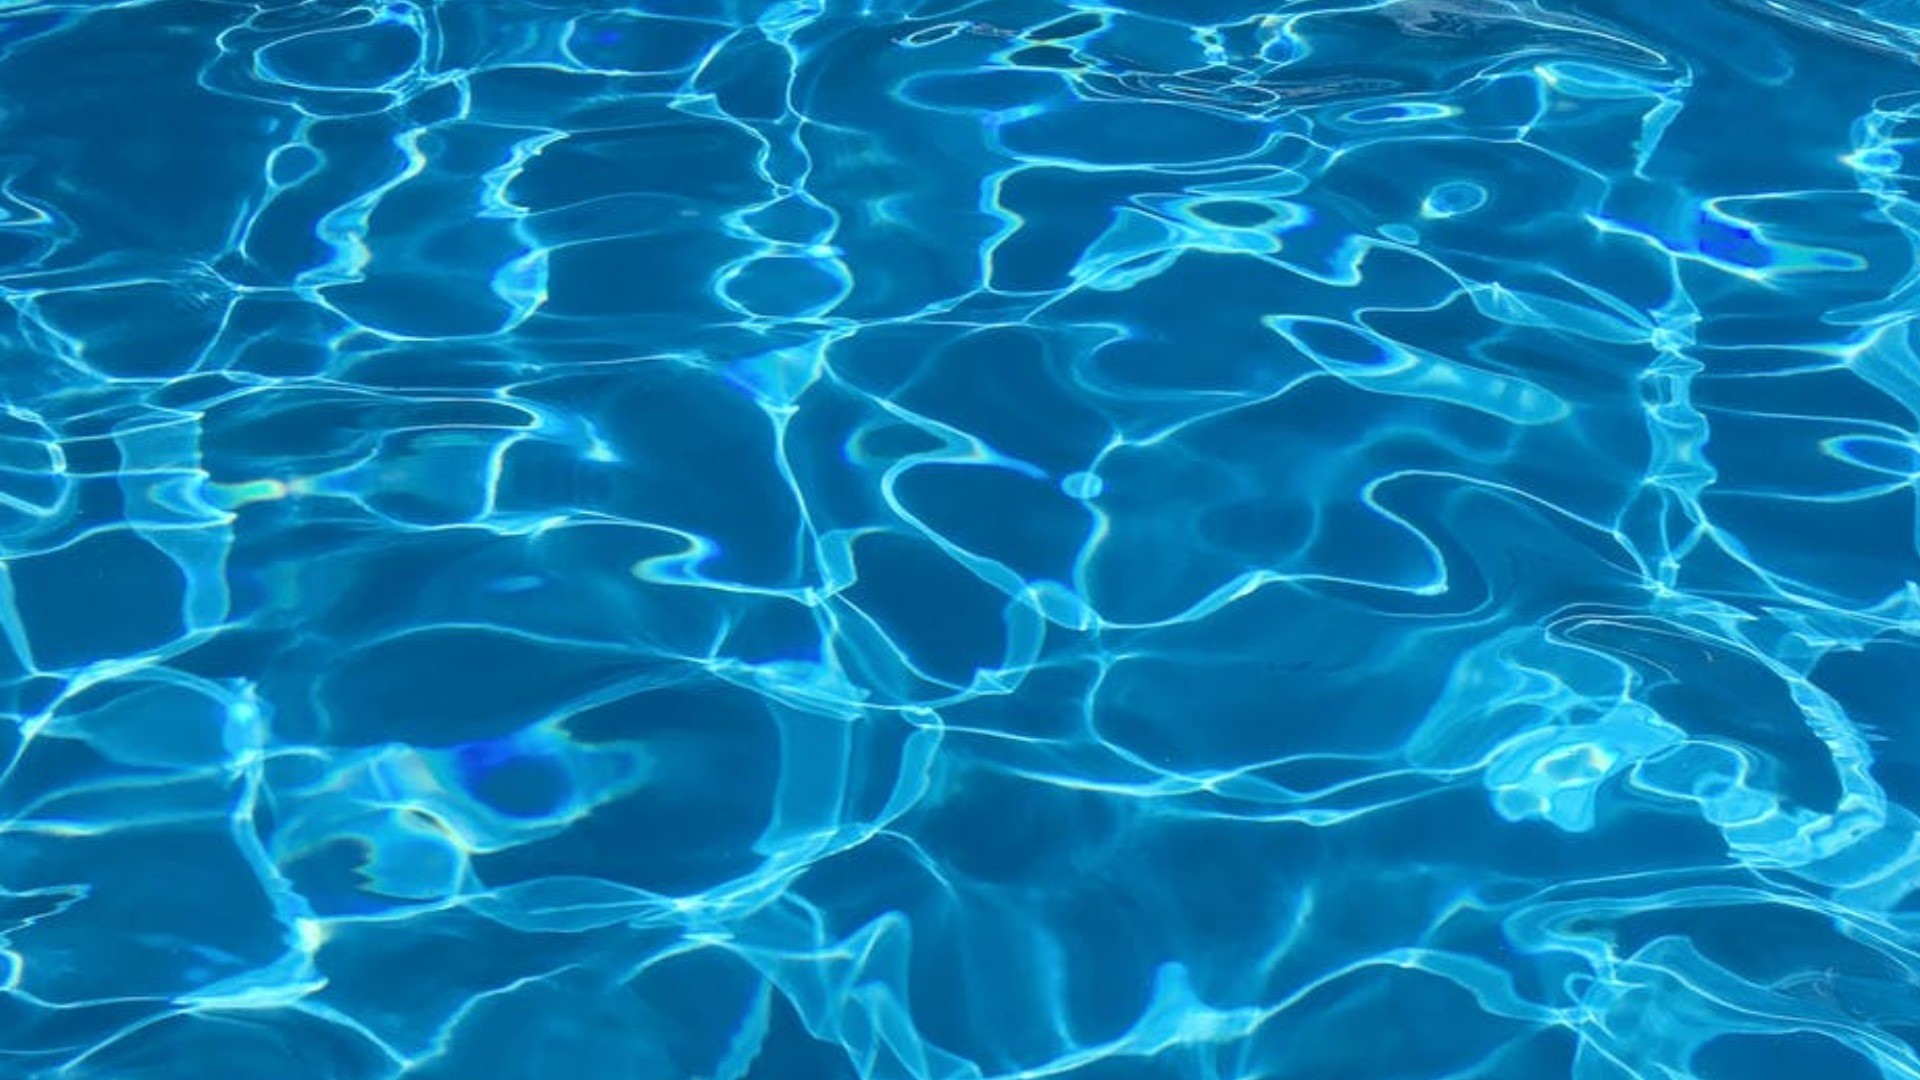 Forsyth County Fire said the initial 911 call they received suggested a large amount of chlorine had been "accidentally introduced into one of the pools."